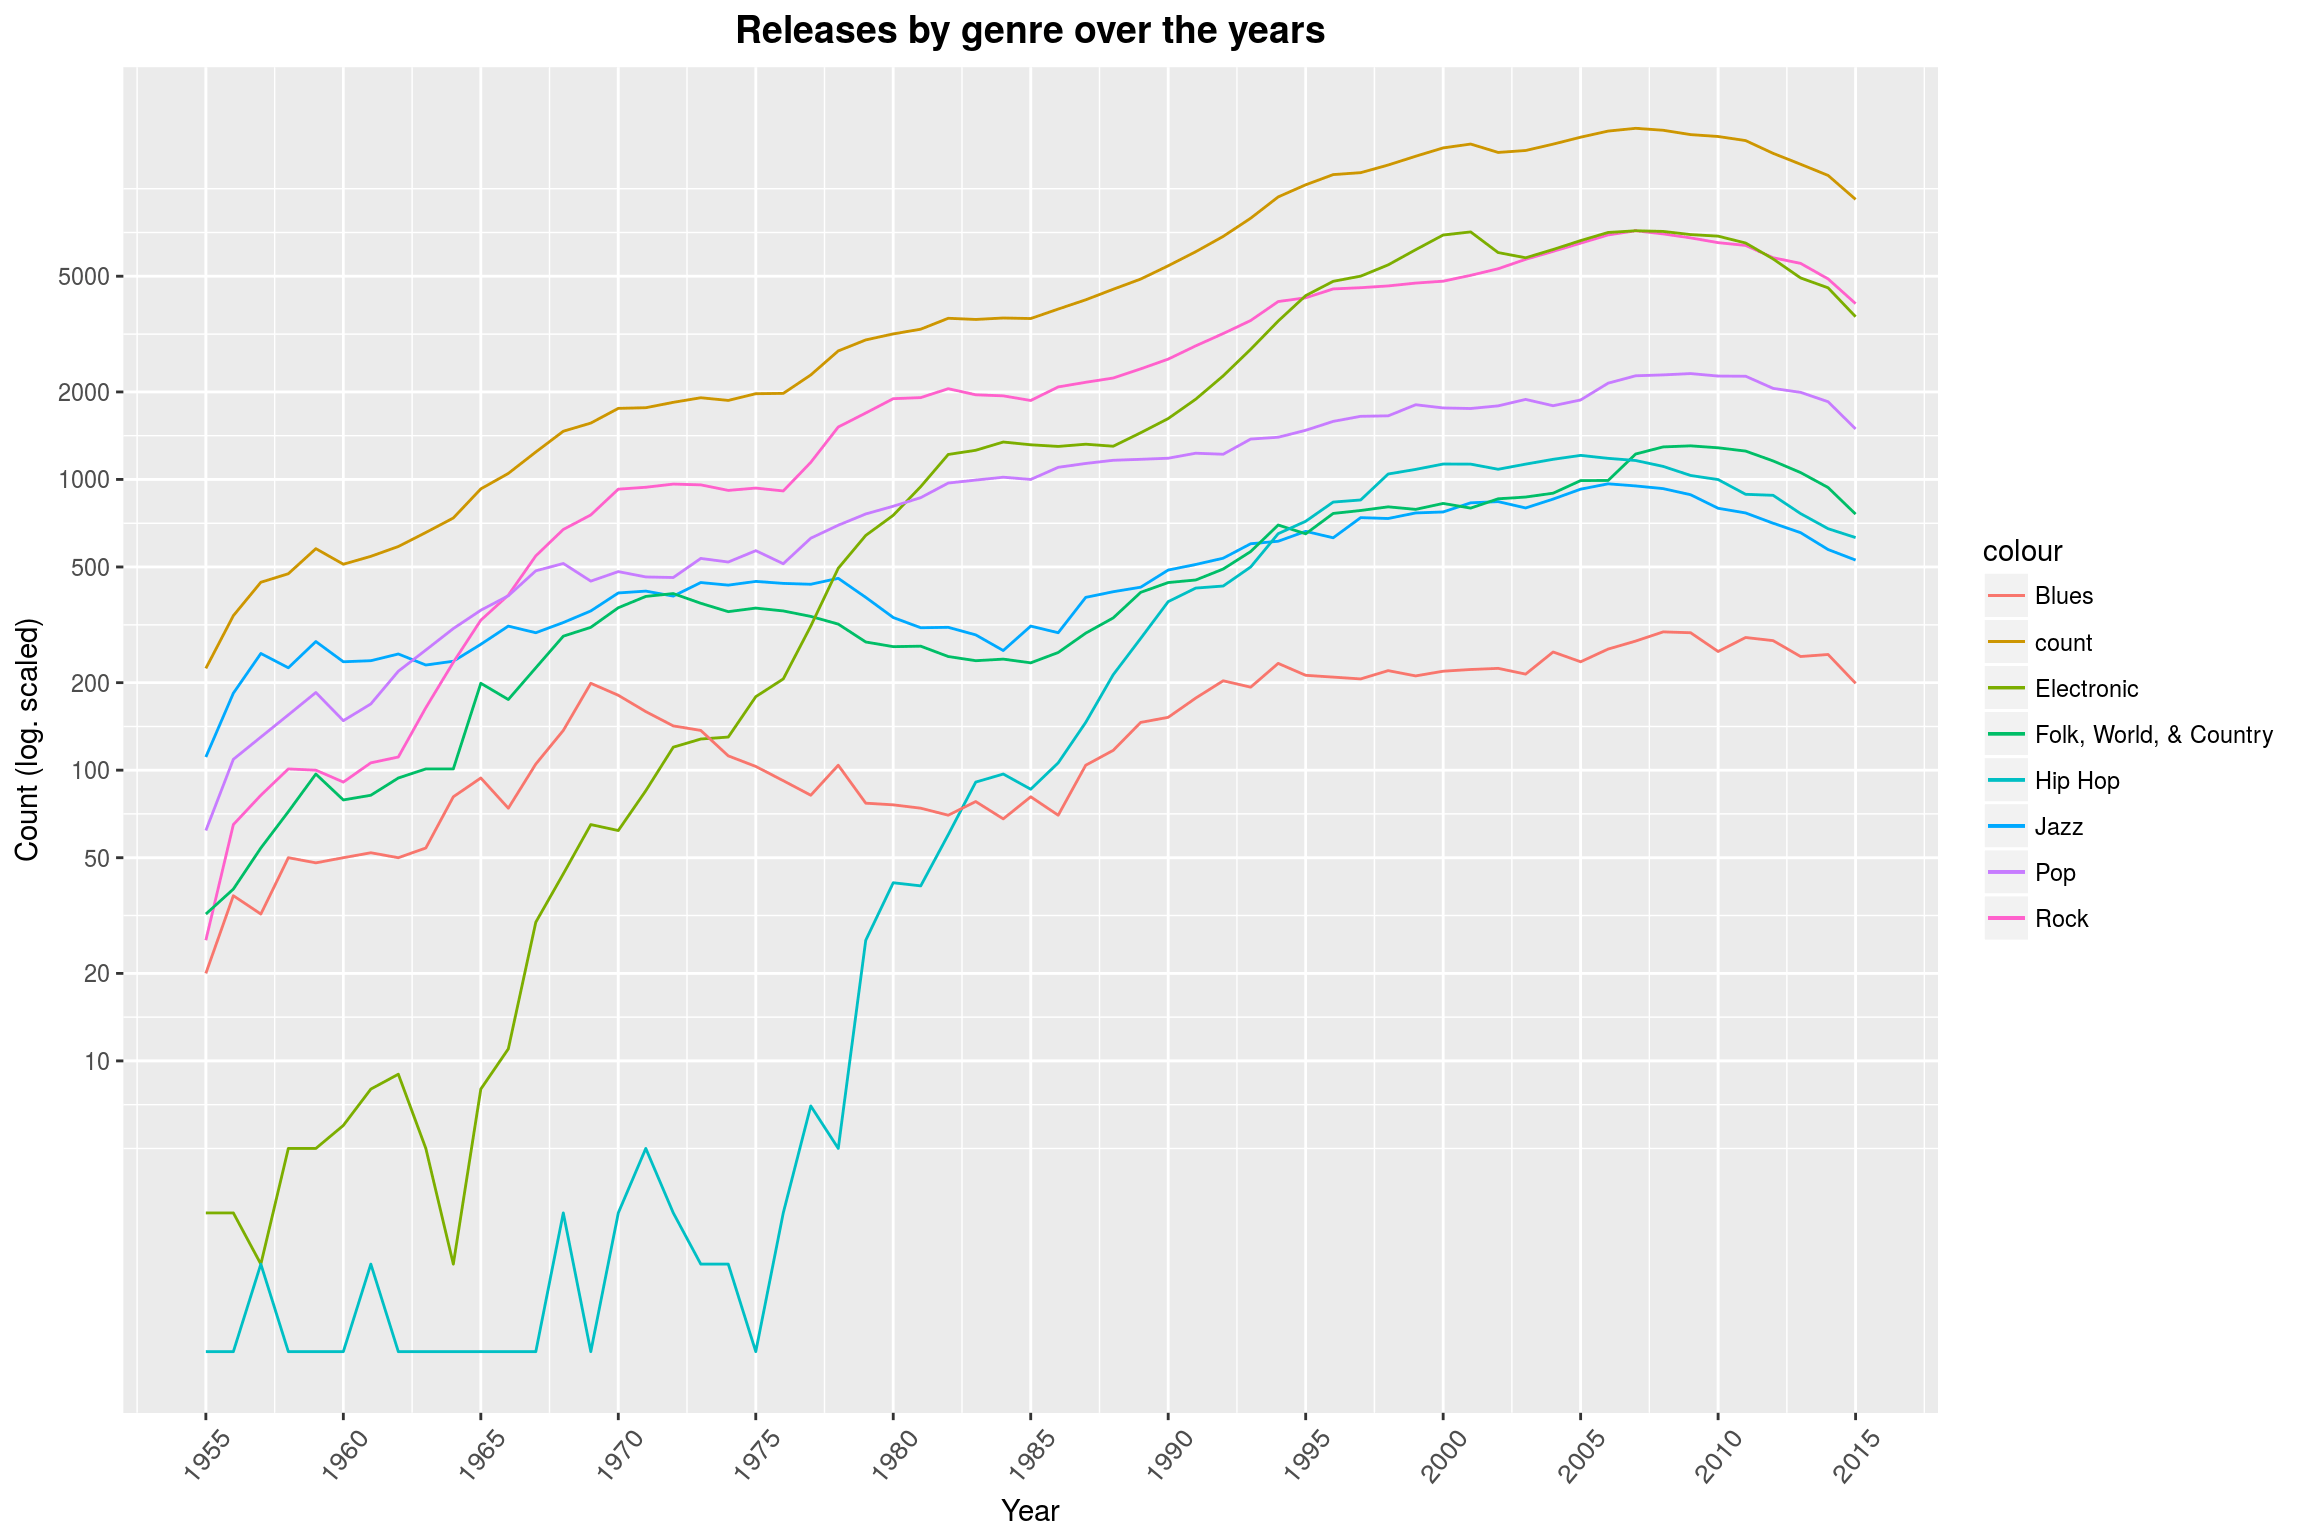 Releases by genre over the years